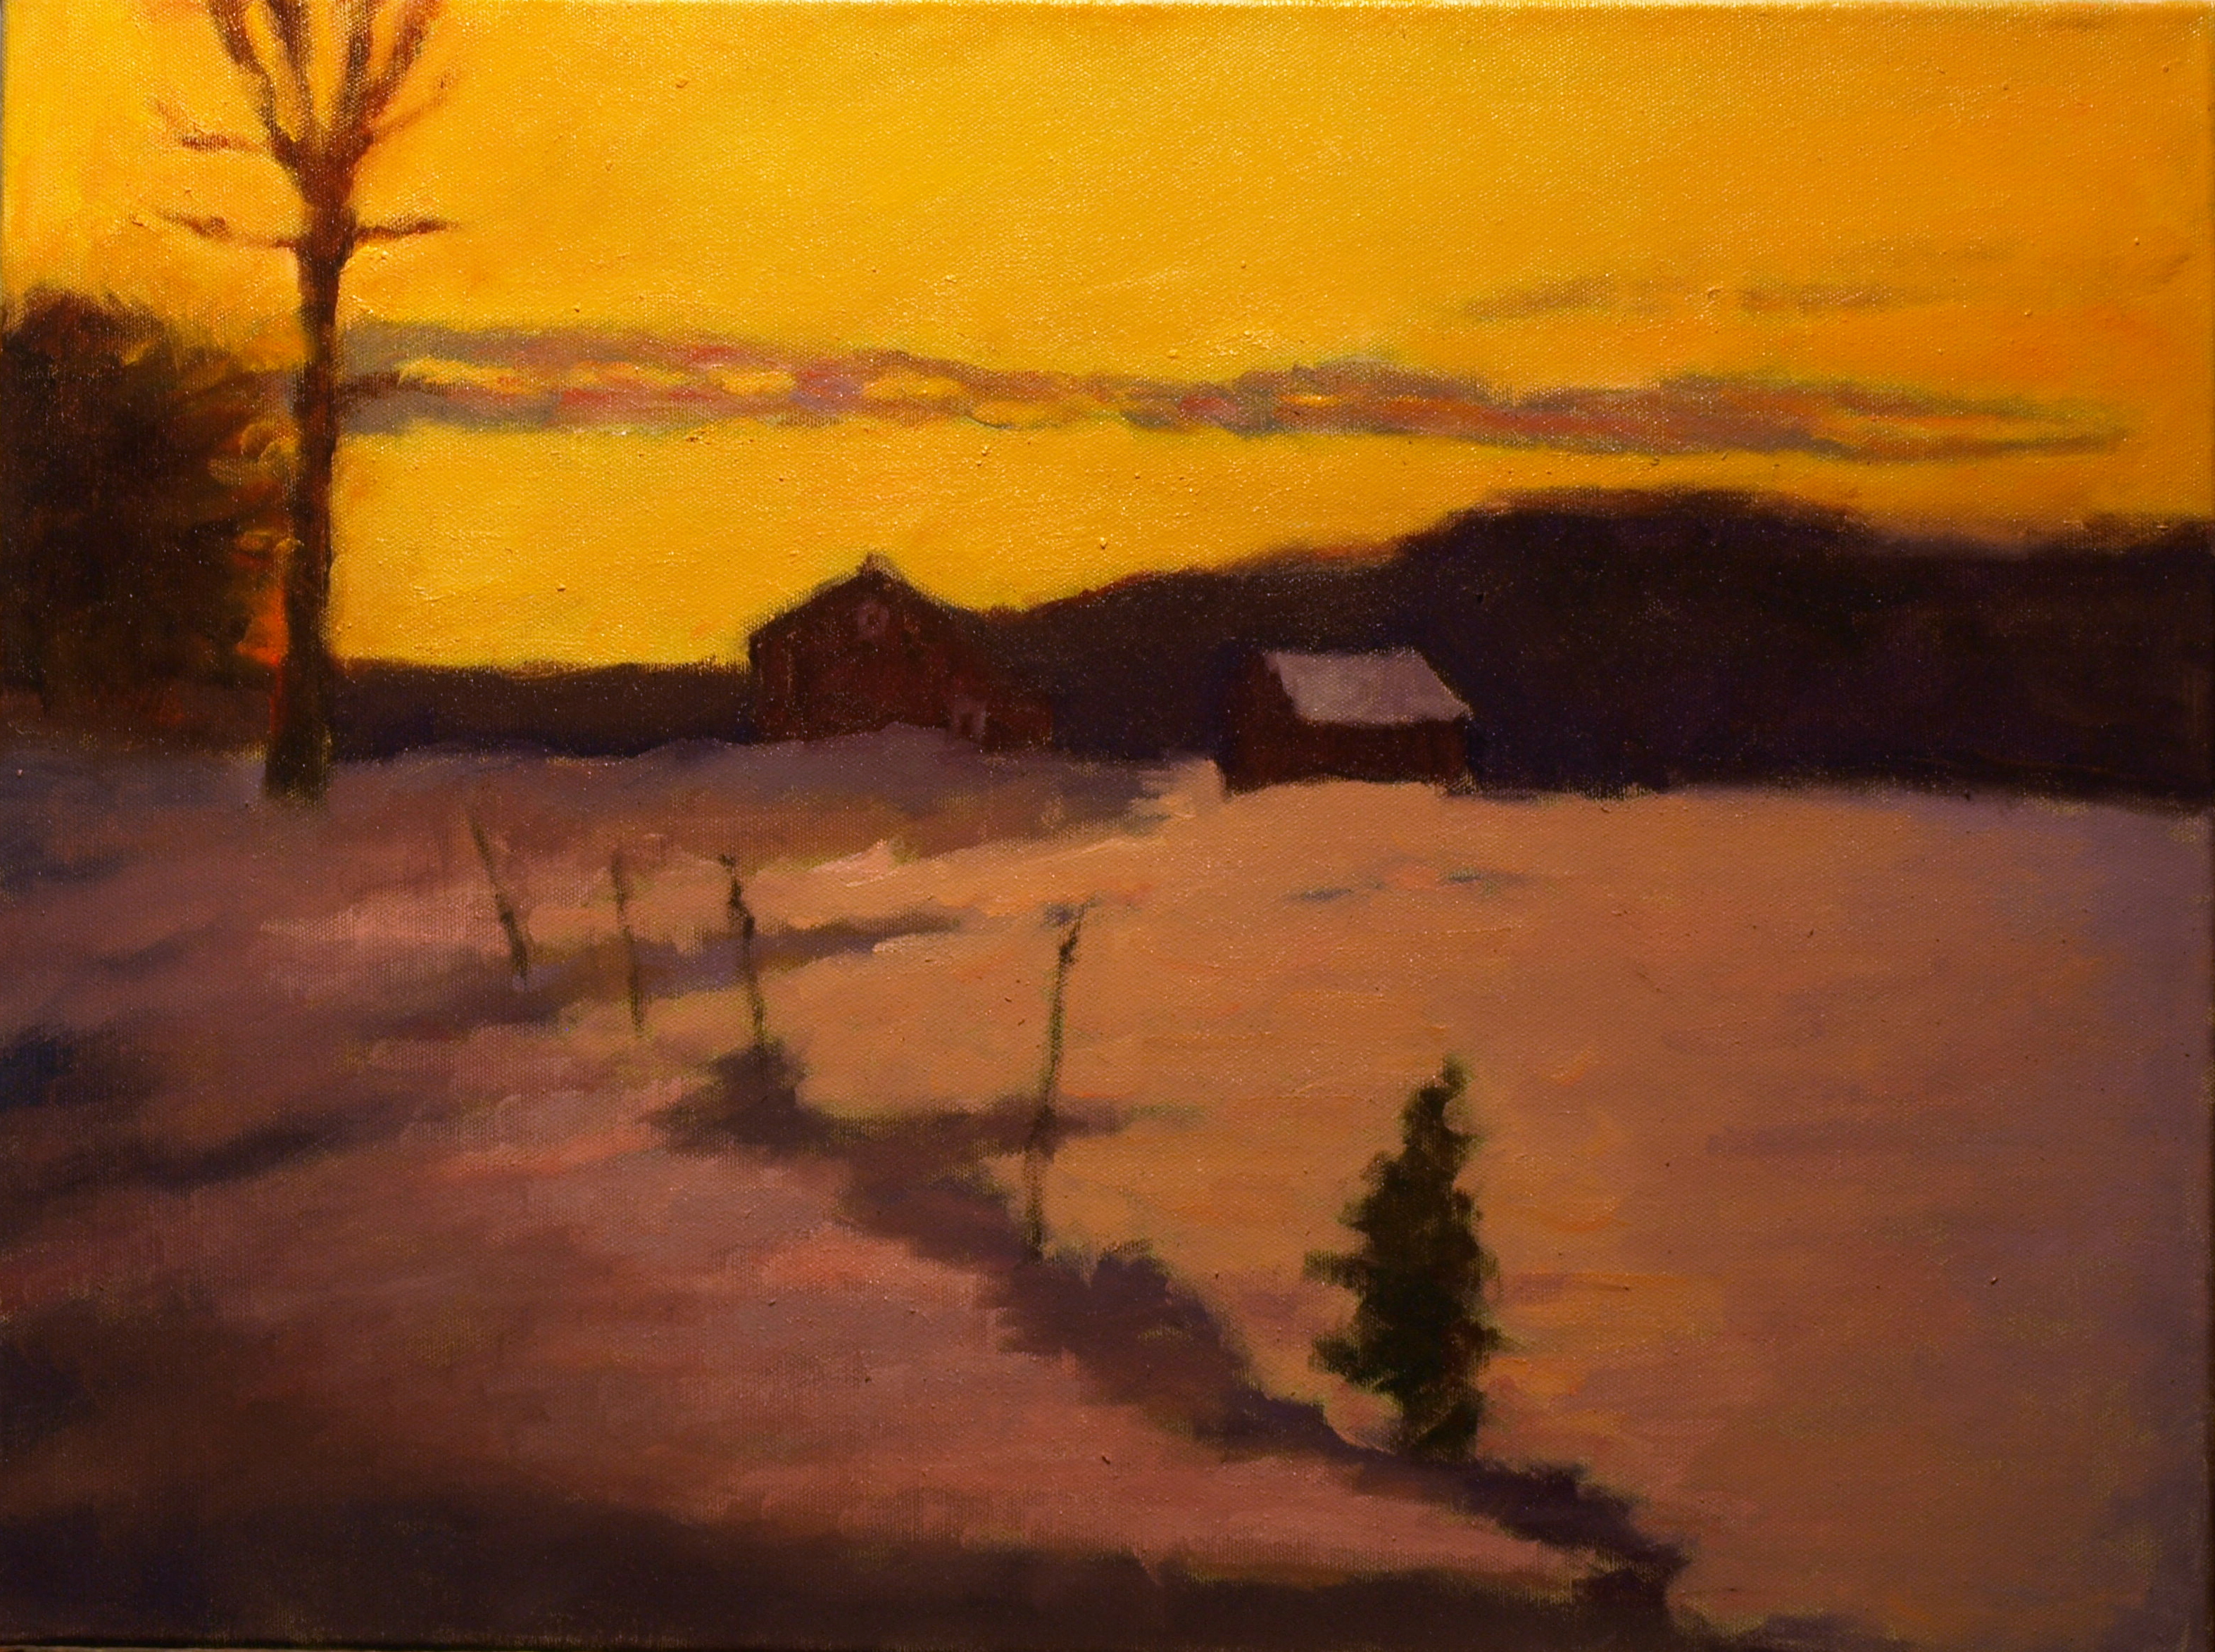 Last Light - Winter Day, Oil on Canvas, 18 x 24 Inches, by Richard Stalter, $650